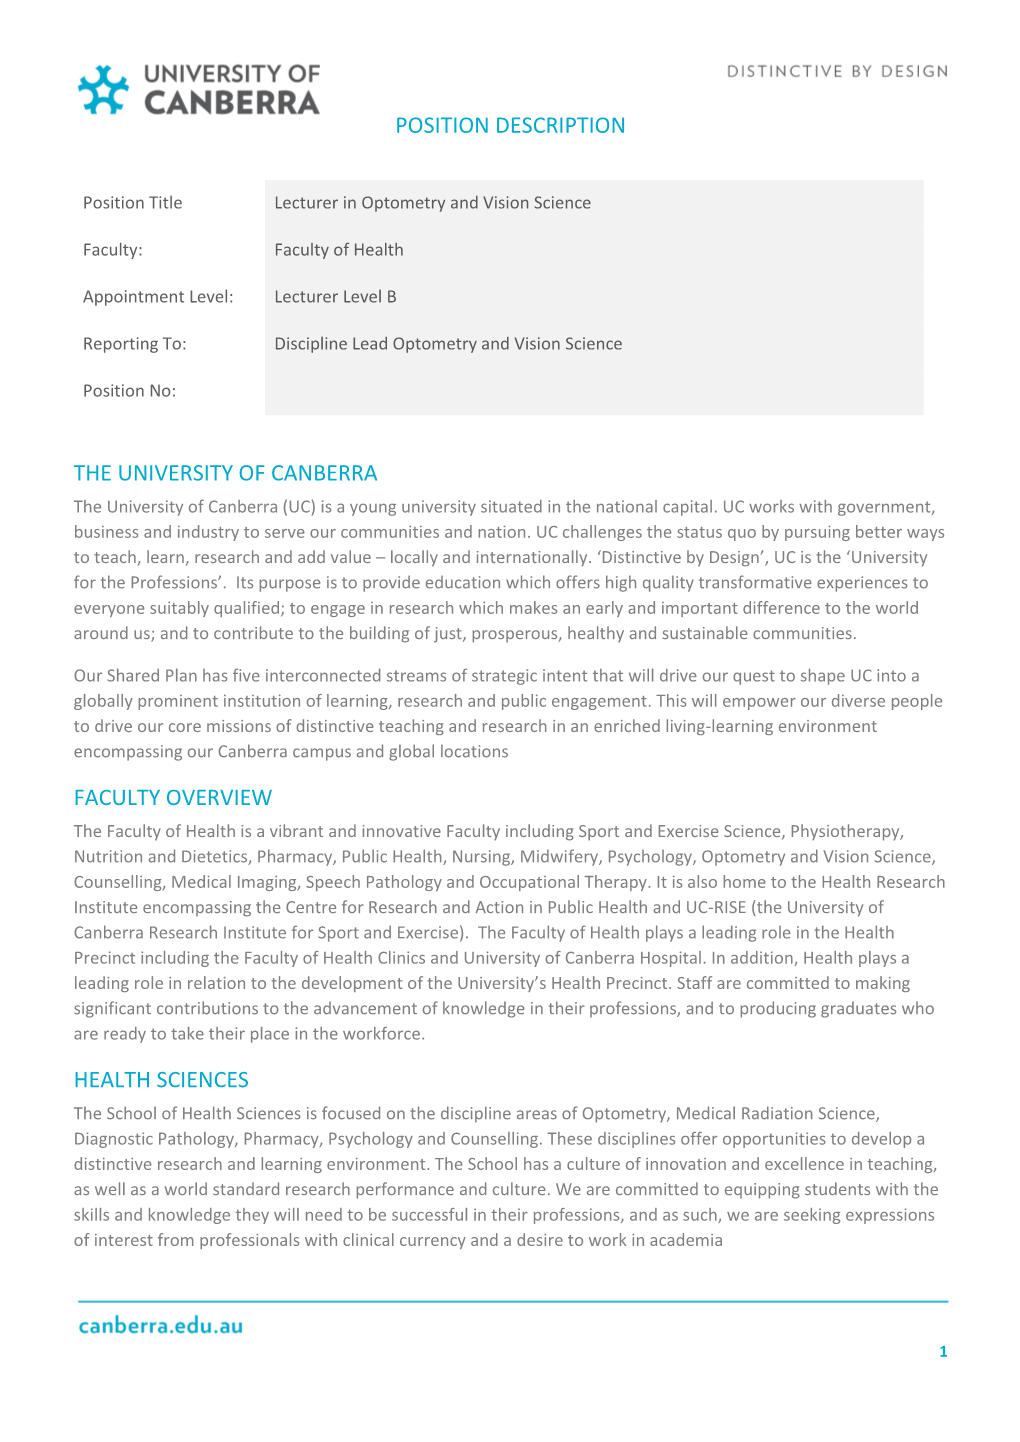 Position Description the University of Canberra Faculty Overview Health Sciences